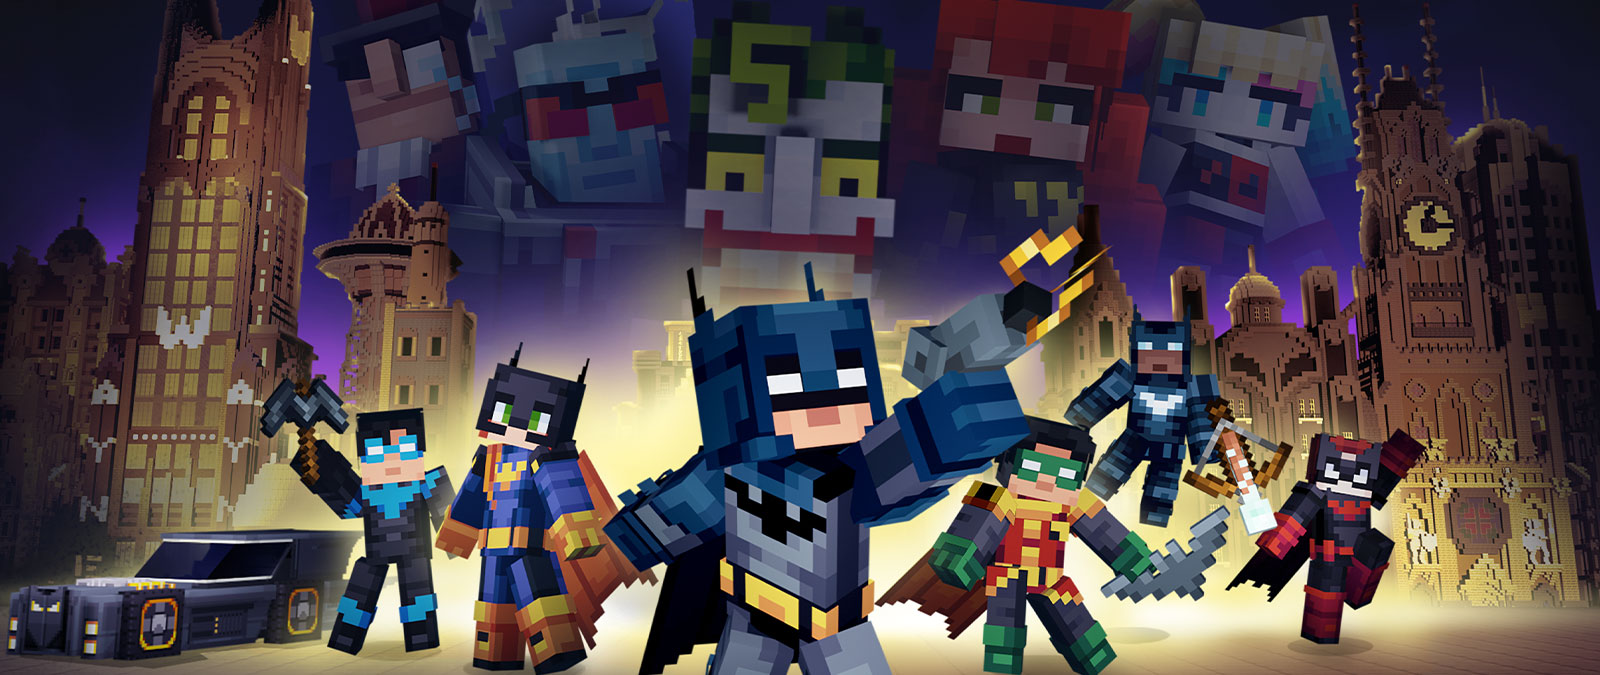 Batman and the Bat Family posed together with villains overlooking a Minecraft Gotham City.